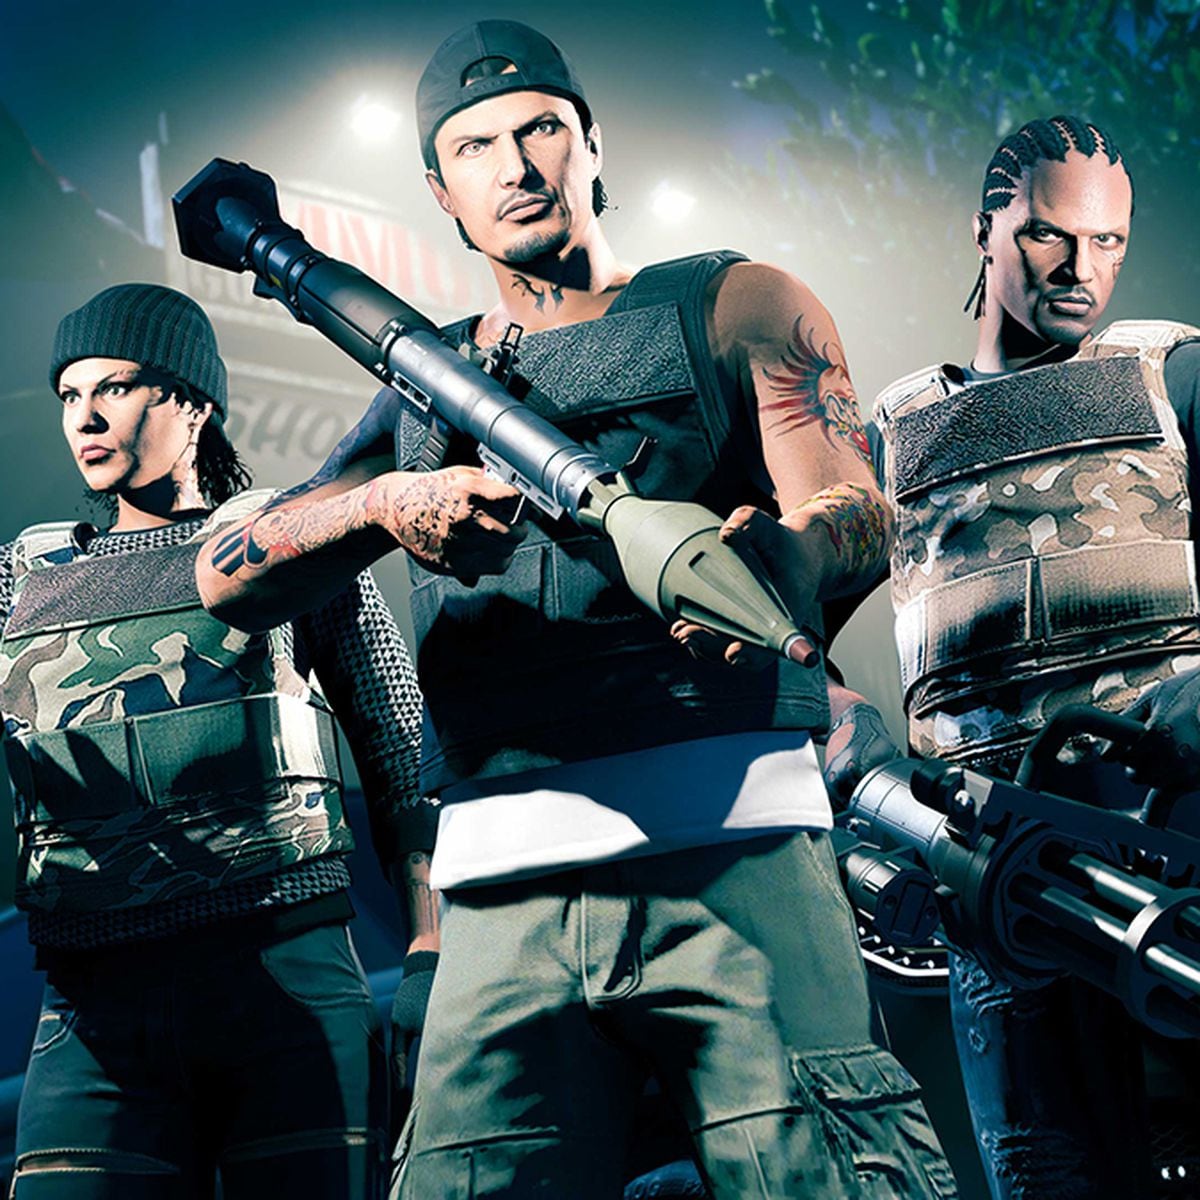 Weekend Reading: Grand Theft Auto 5 vs. Call of Duty: Ghosts